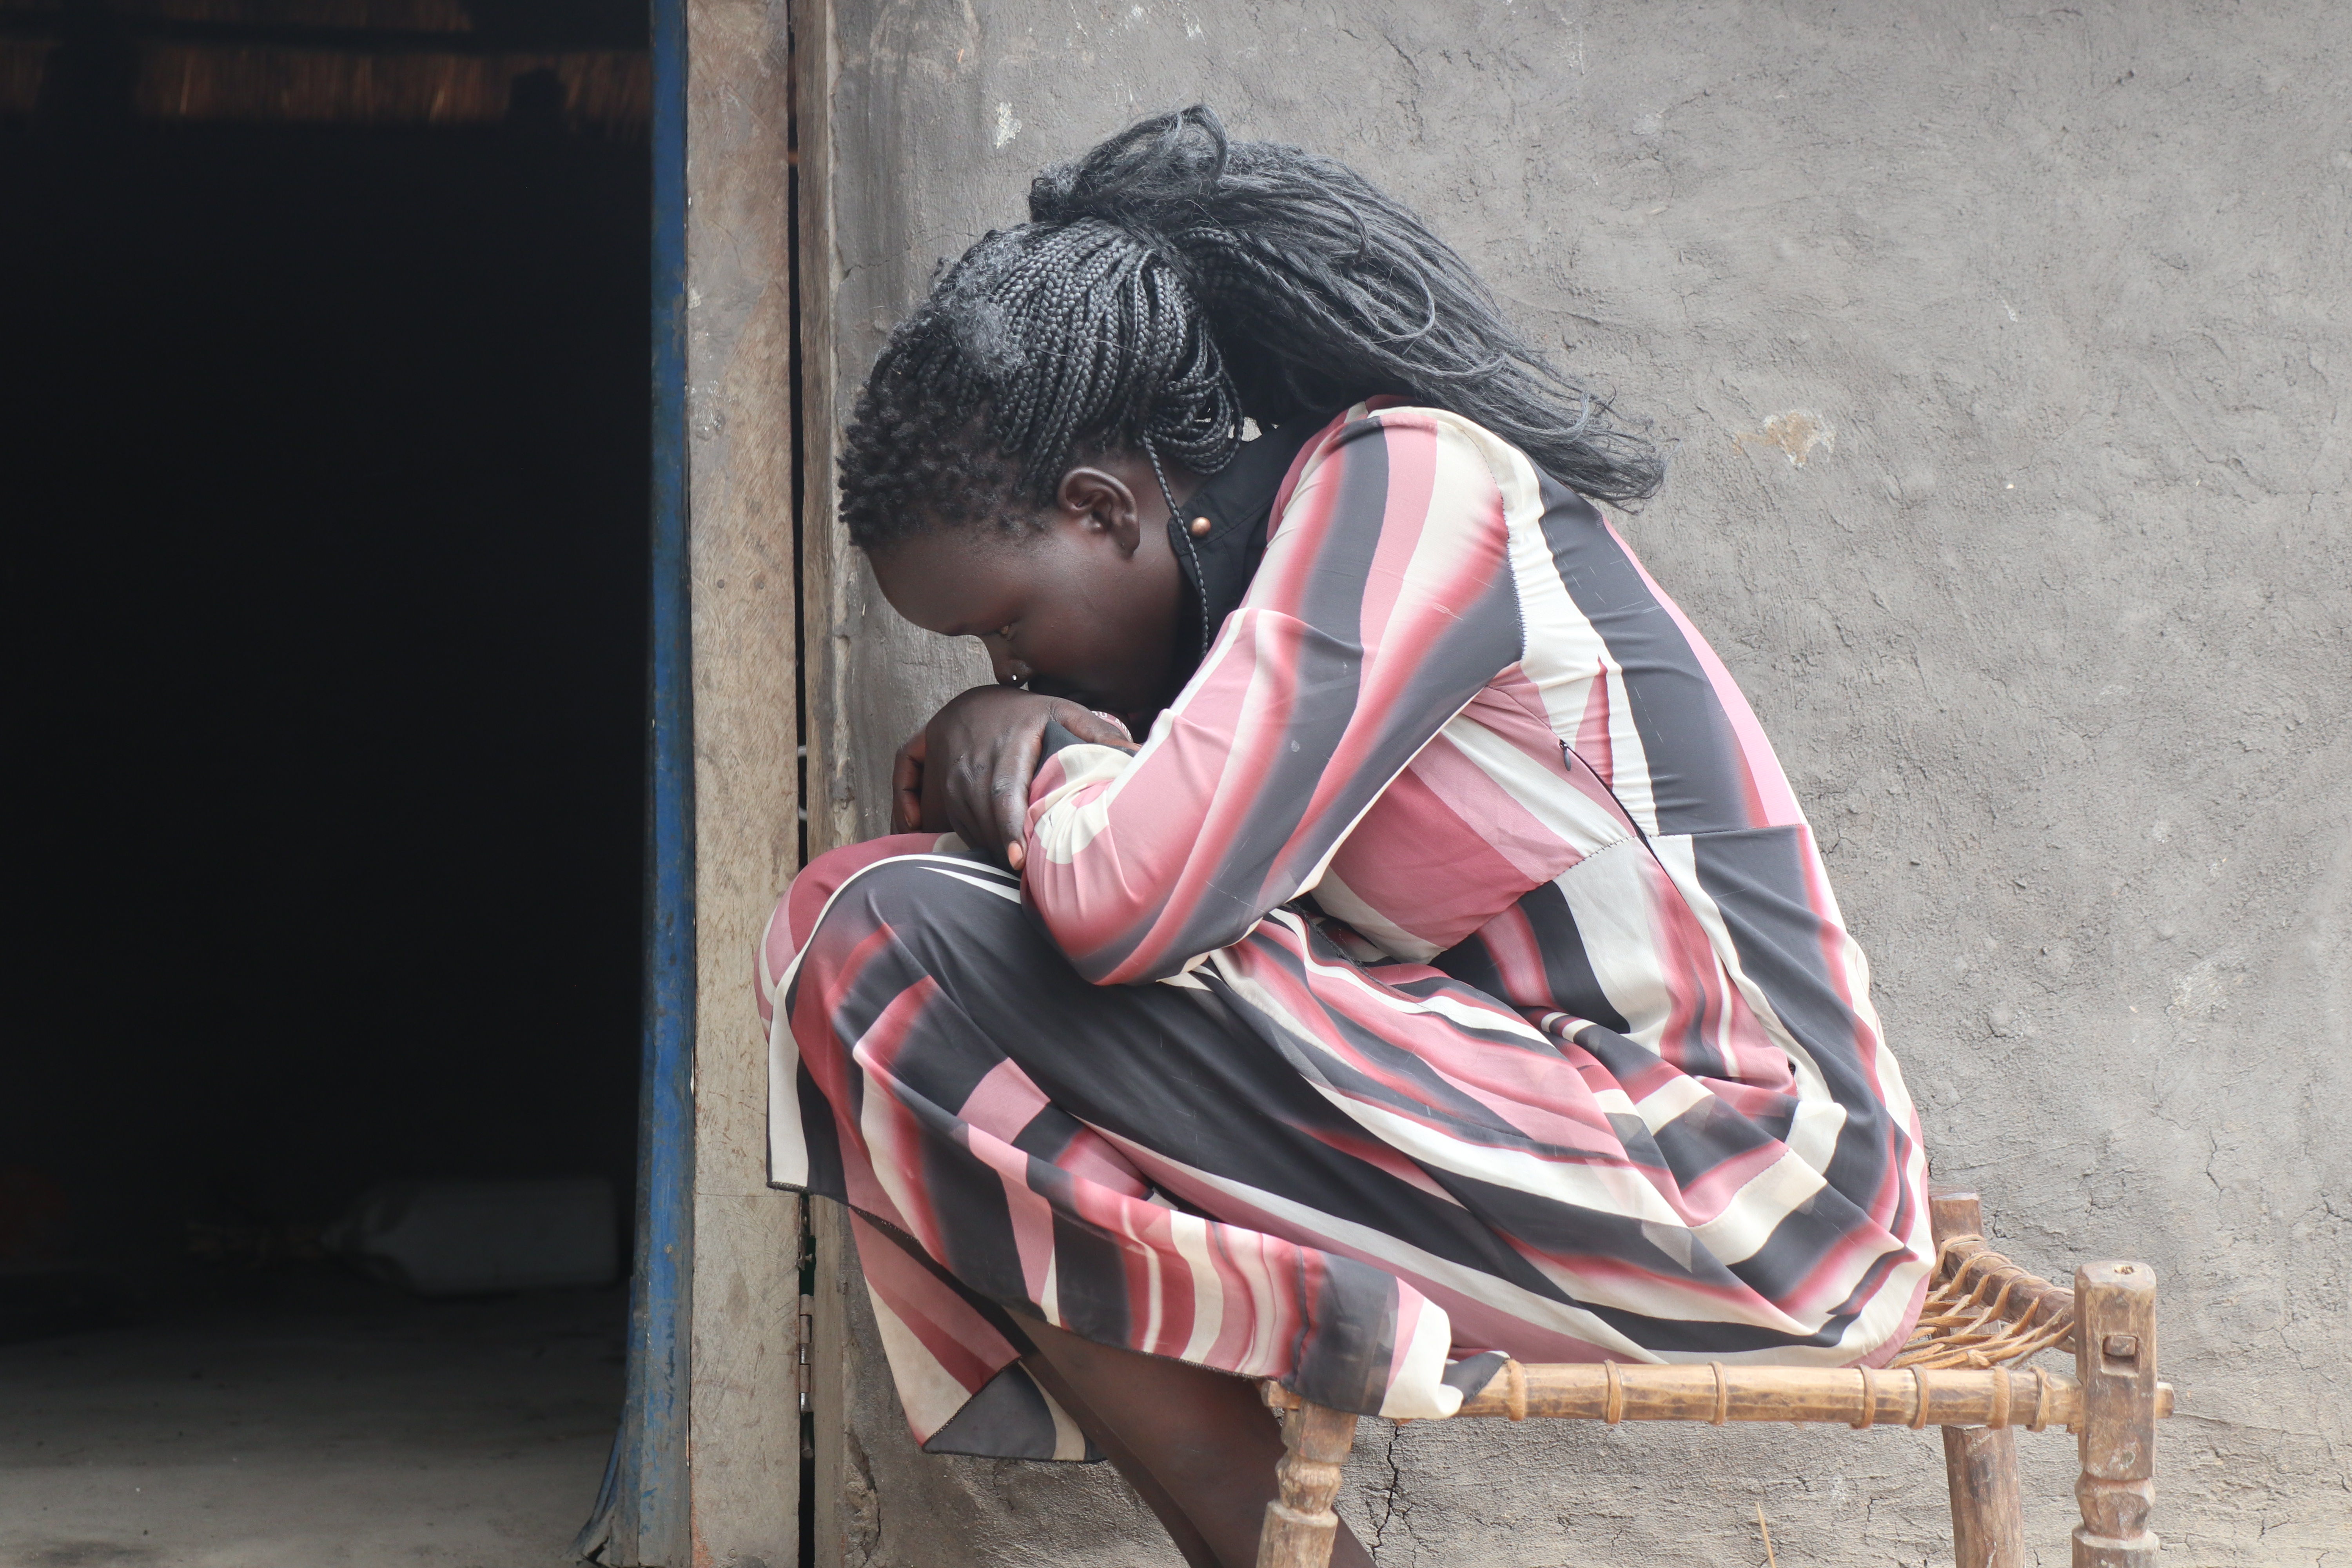 Hunger and old traditions fuel gender based violence and child marriages in South Sudan.